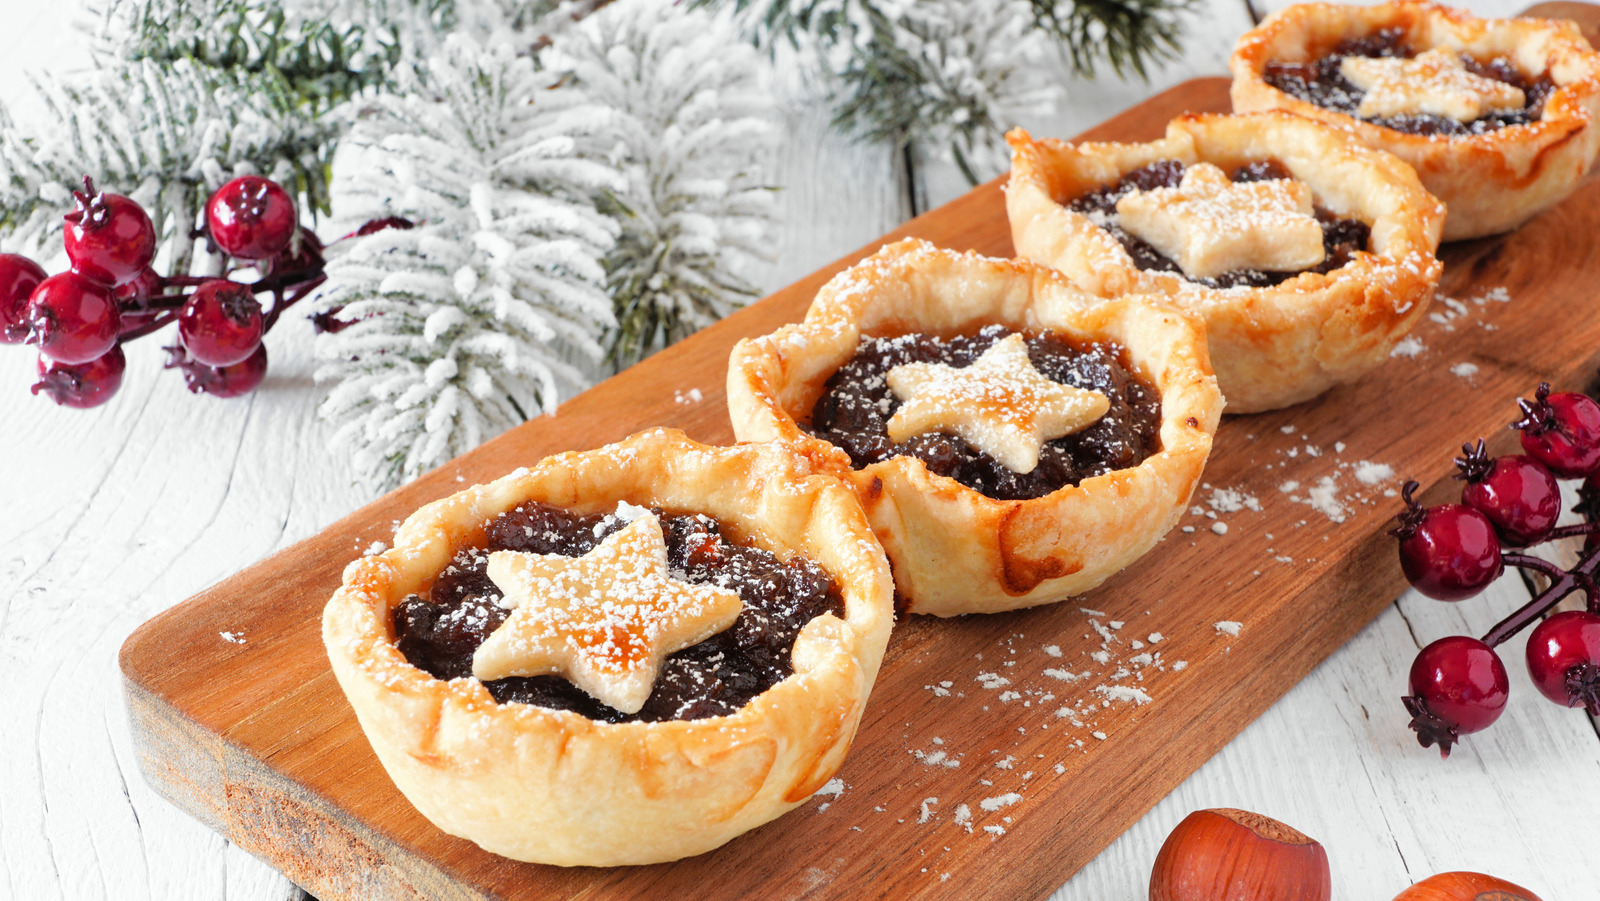 Mince Pies with Clementine & Brandy. Tasty English pastries for